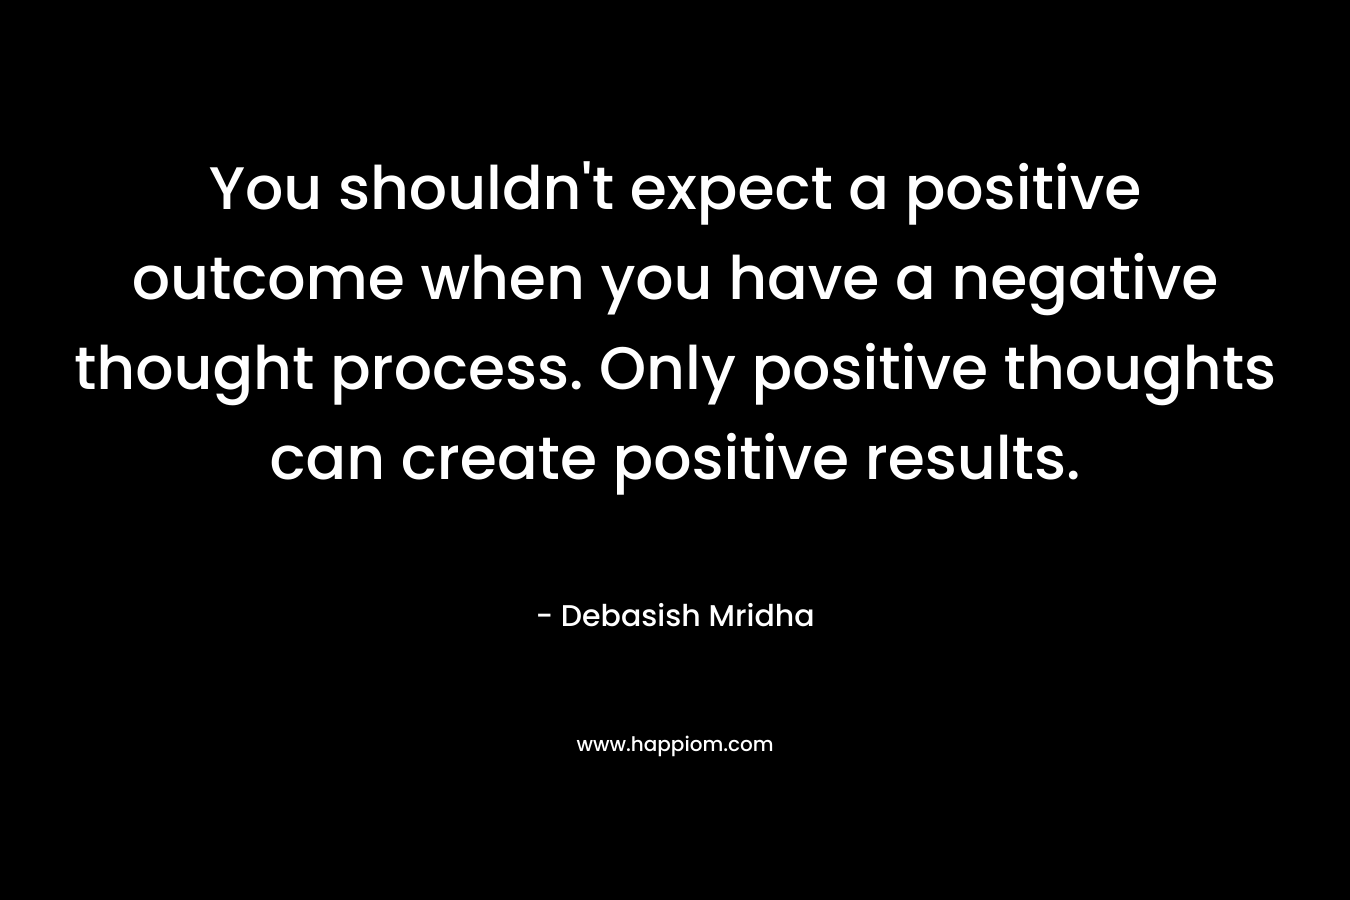 You shouldn't expect a positive outcome when you have a negative thought process. Only positive thoughts can create positive results.